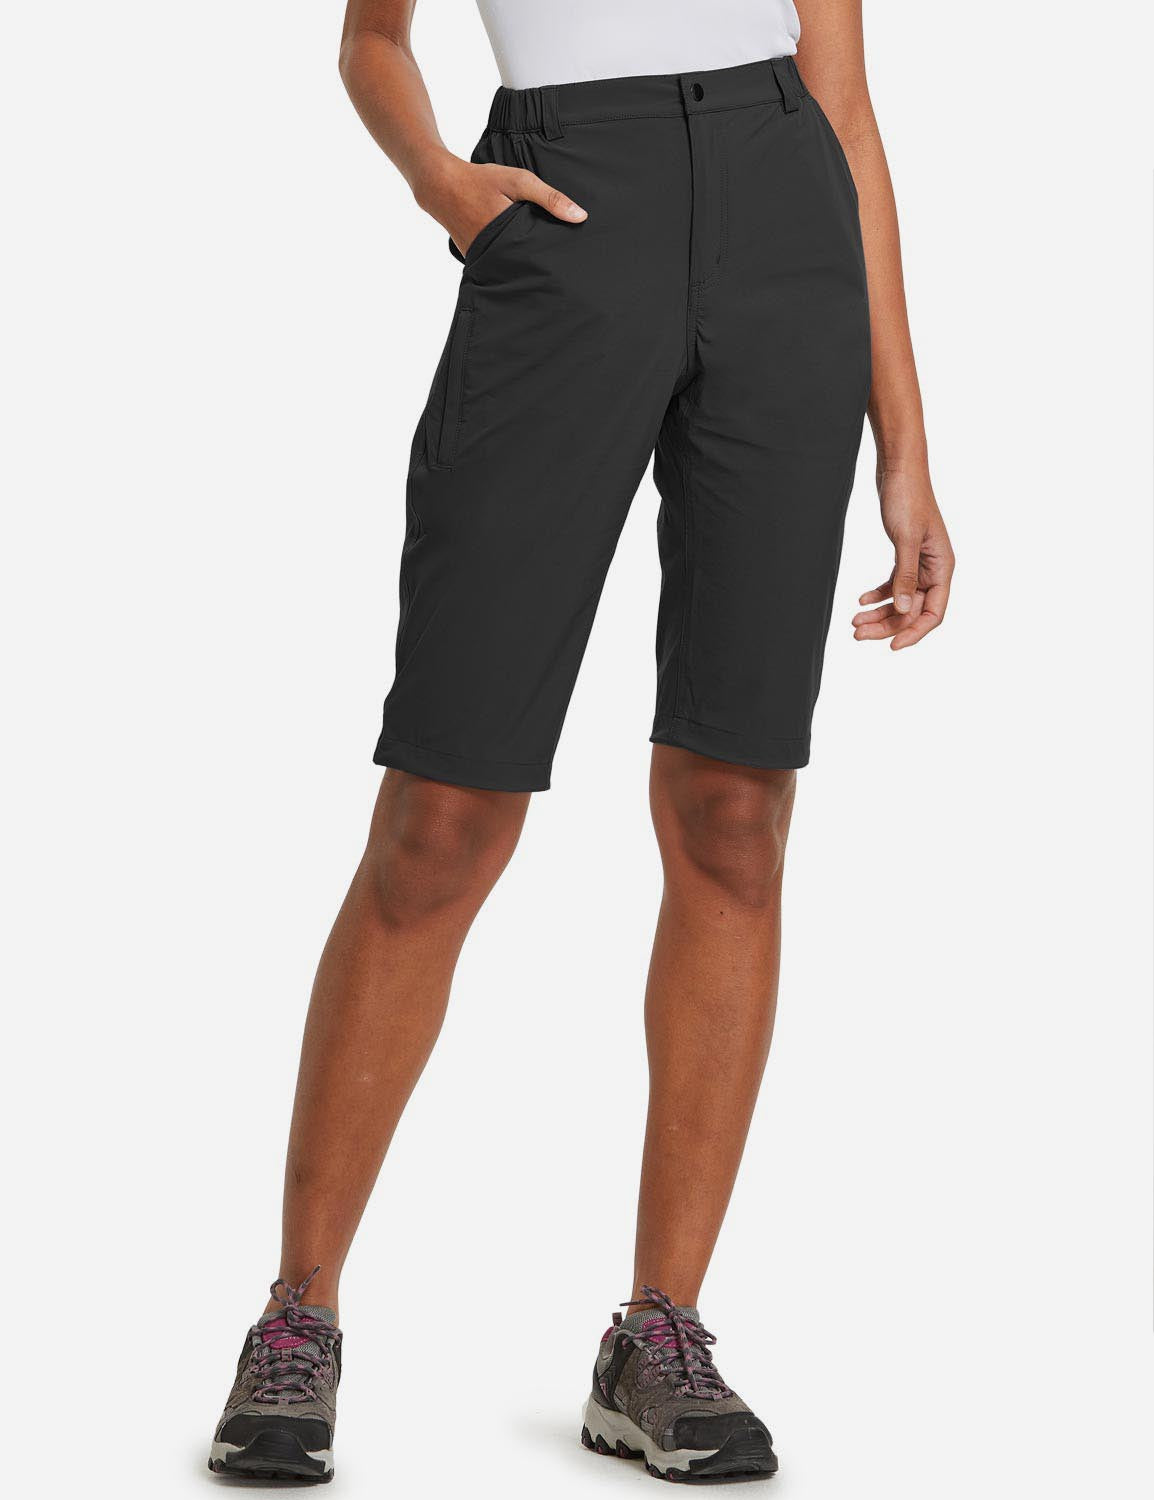 Baleaf Women's UPF50+ Quick Dry DWR Knee High Outdoor Shorts agb035 Black Front